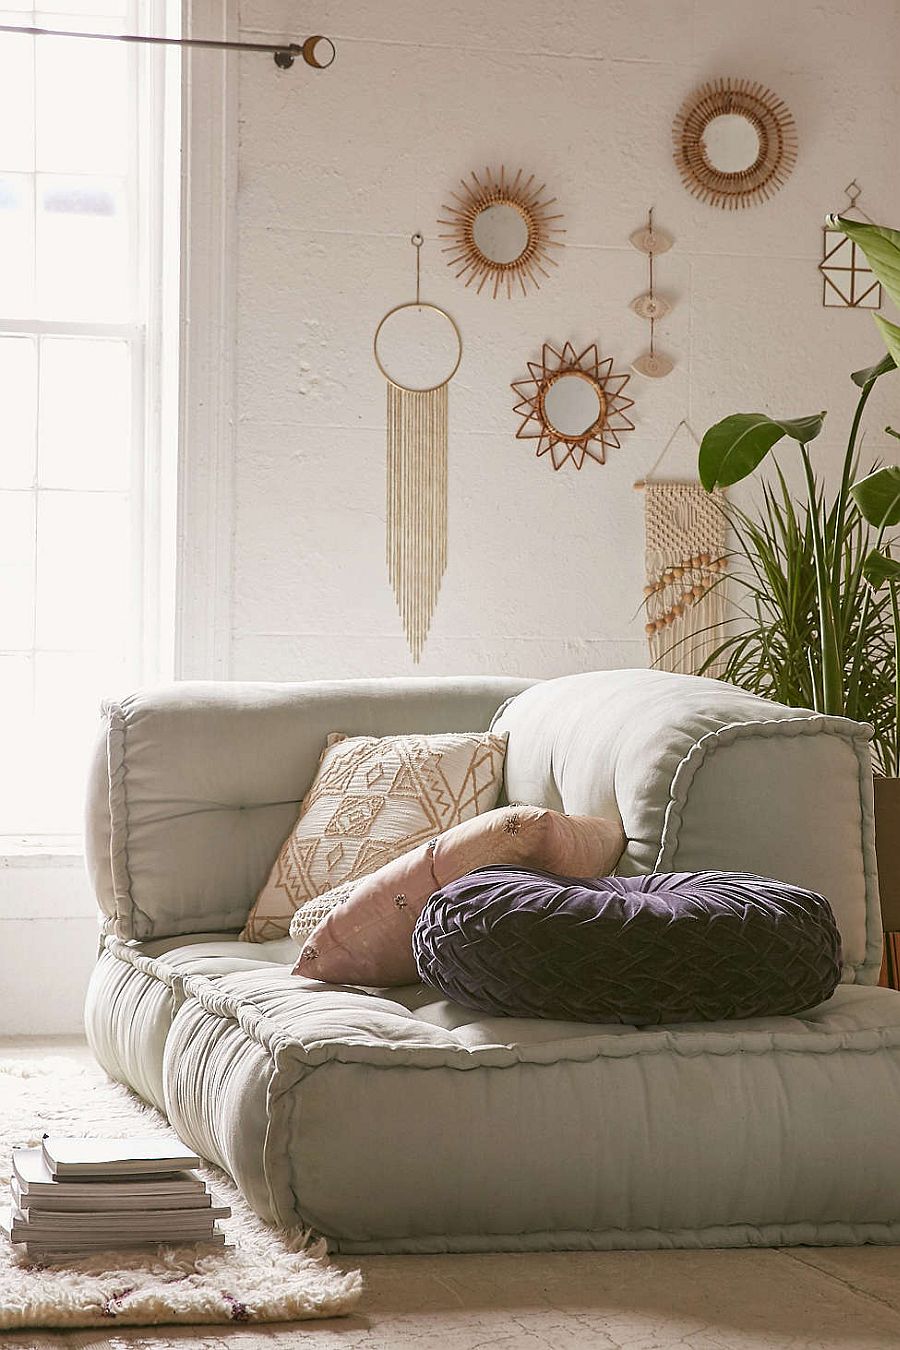 Embrace-the-tropical-boho-style-in-the-bedroom-with-contemporary-decor-from-Urban-Outfitters